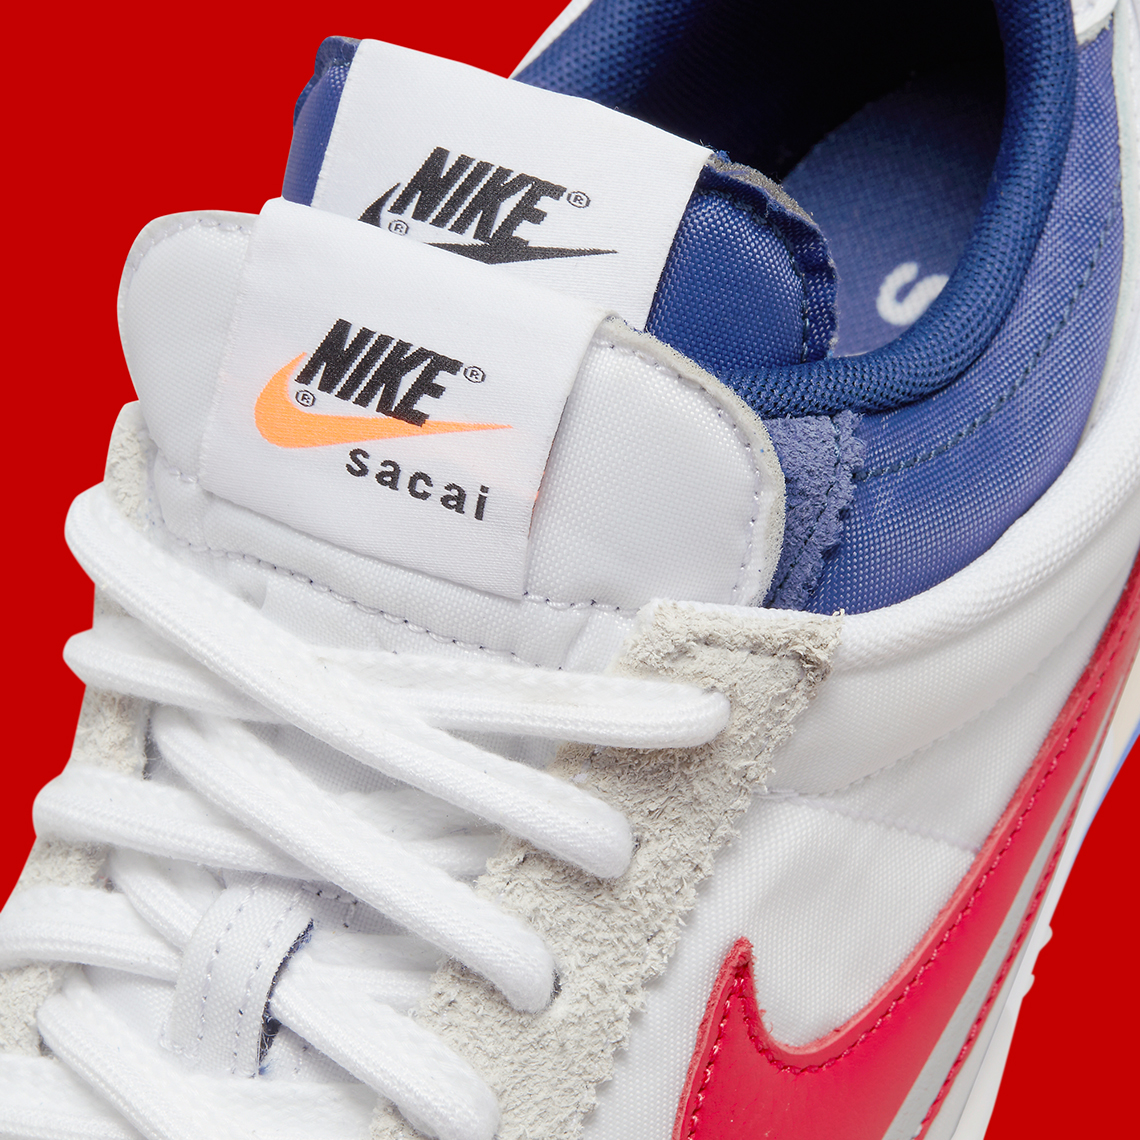 Sacai Nike Cortez 4 0 White Red Royal Dq0581 100 Release Date 6